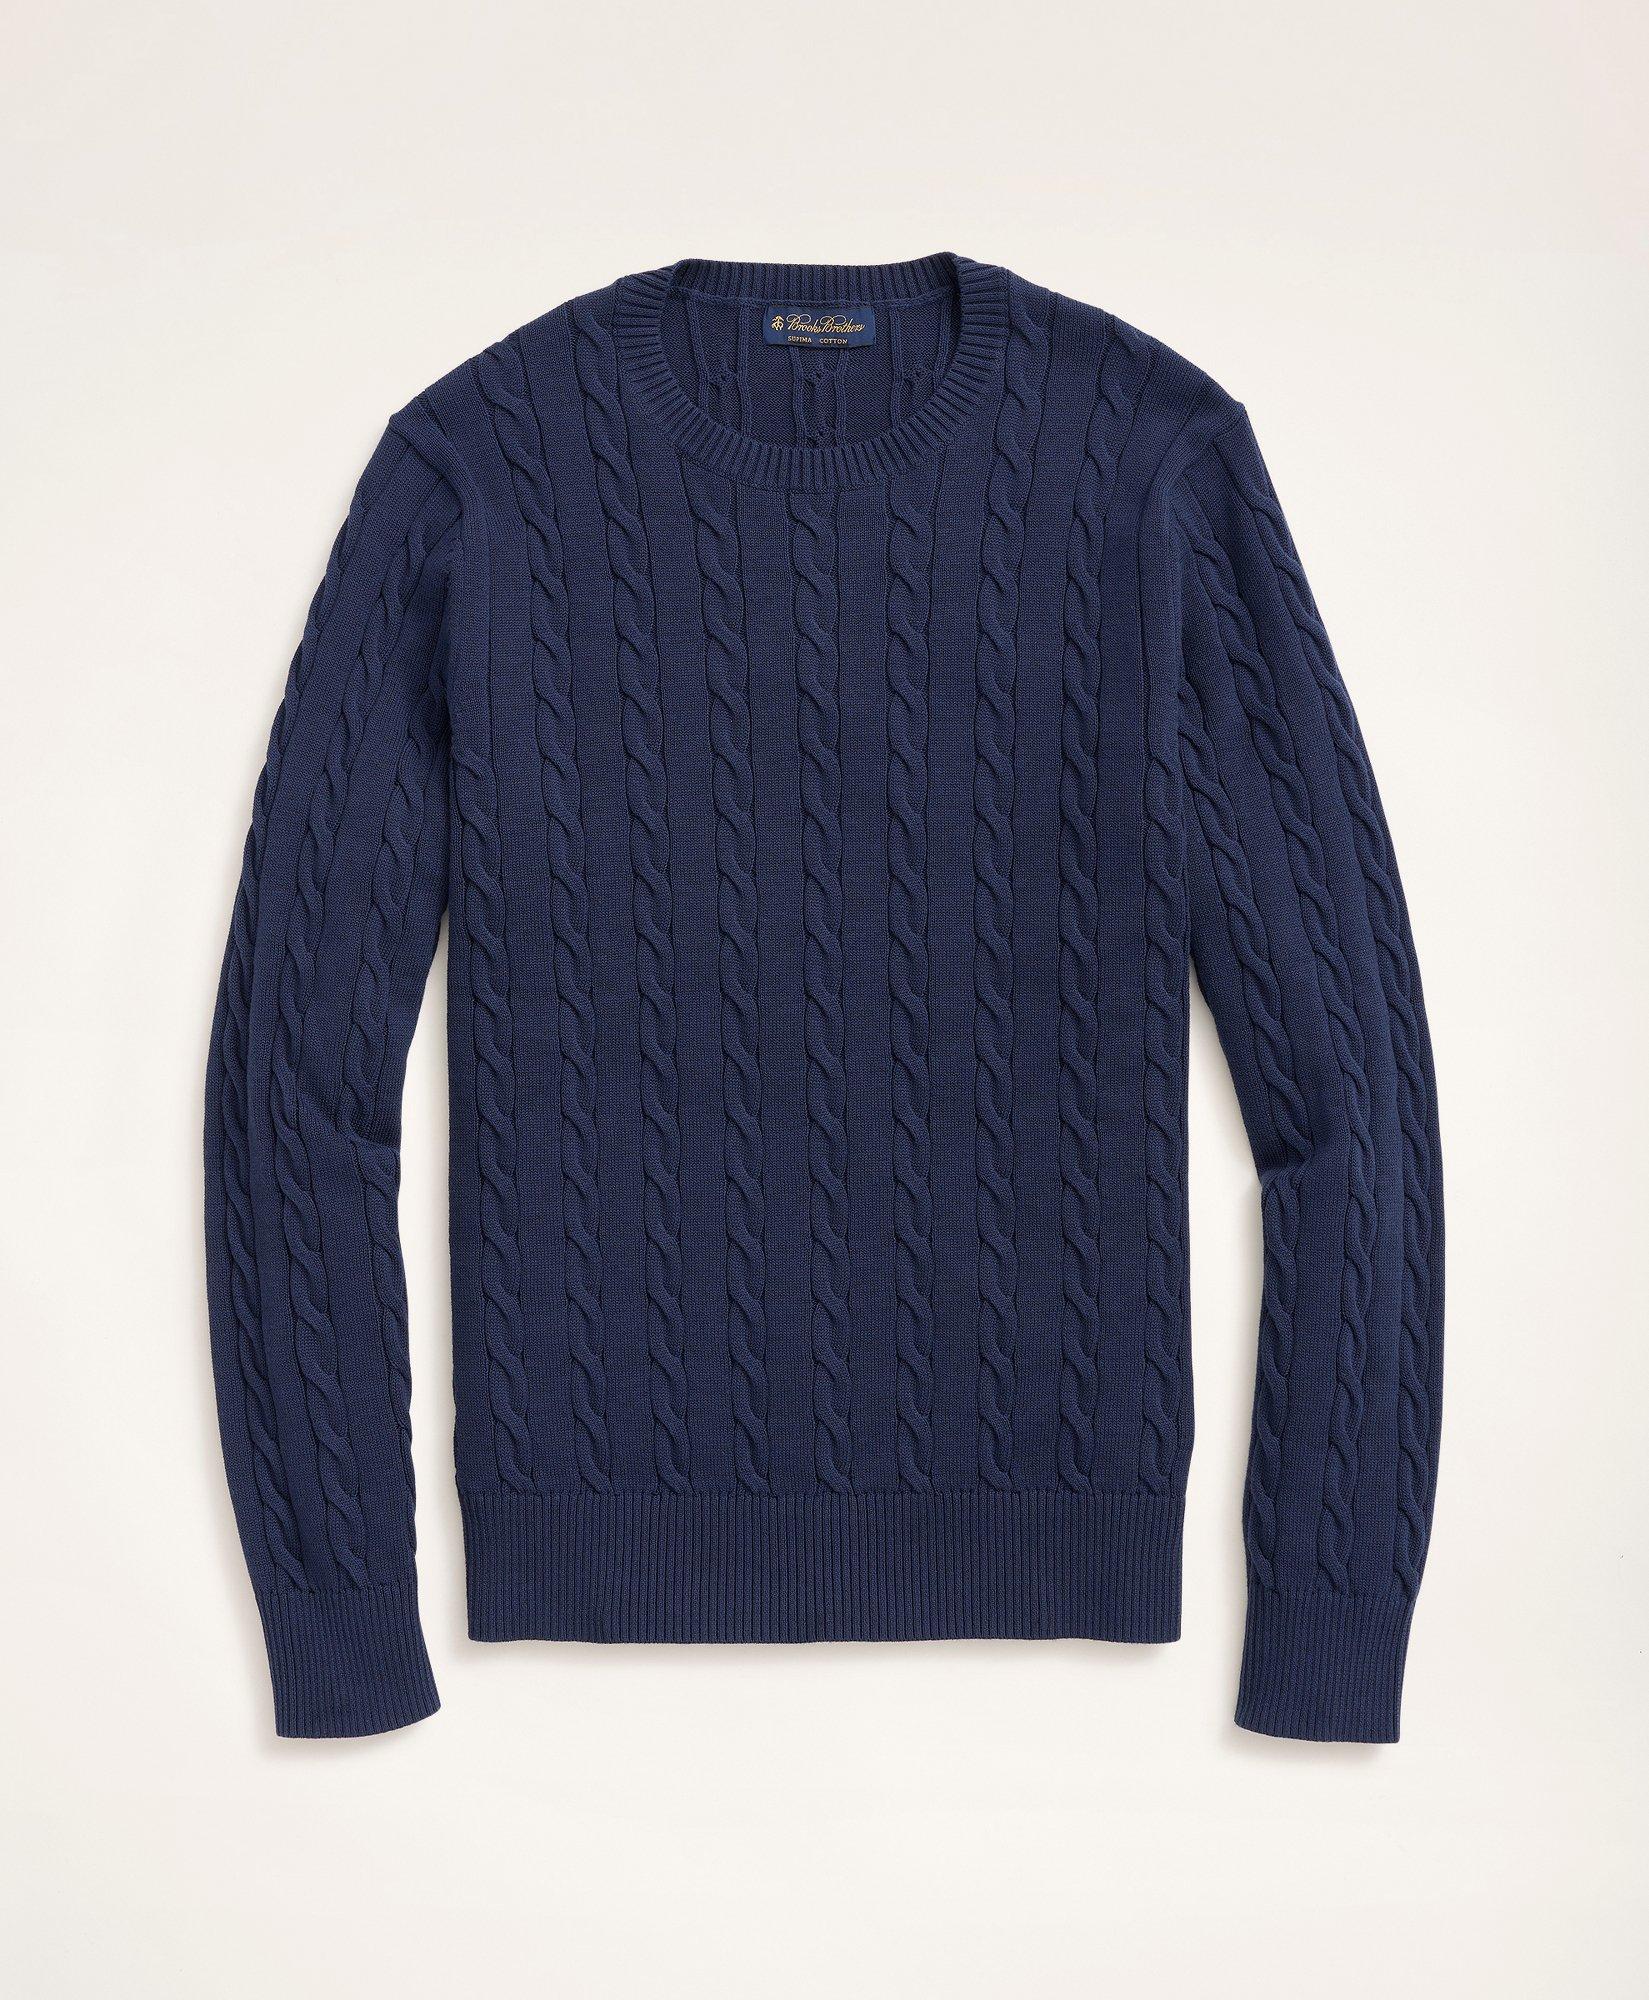 Brooks Brothers Big & Tall Supima Cotton Cable Crewneck Sweater | Navy | Size 3x Tall